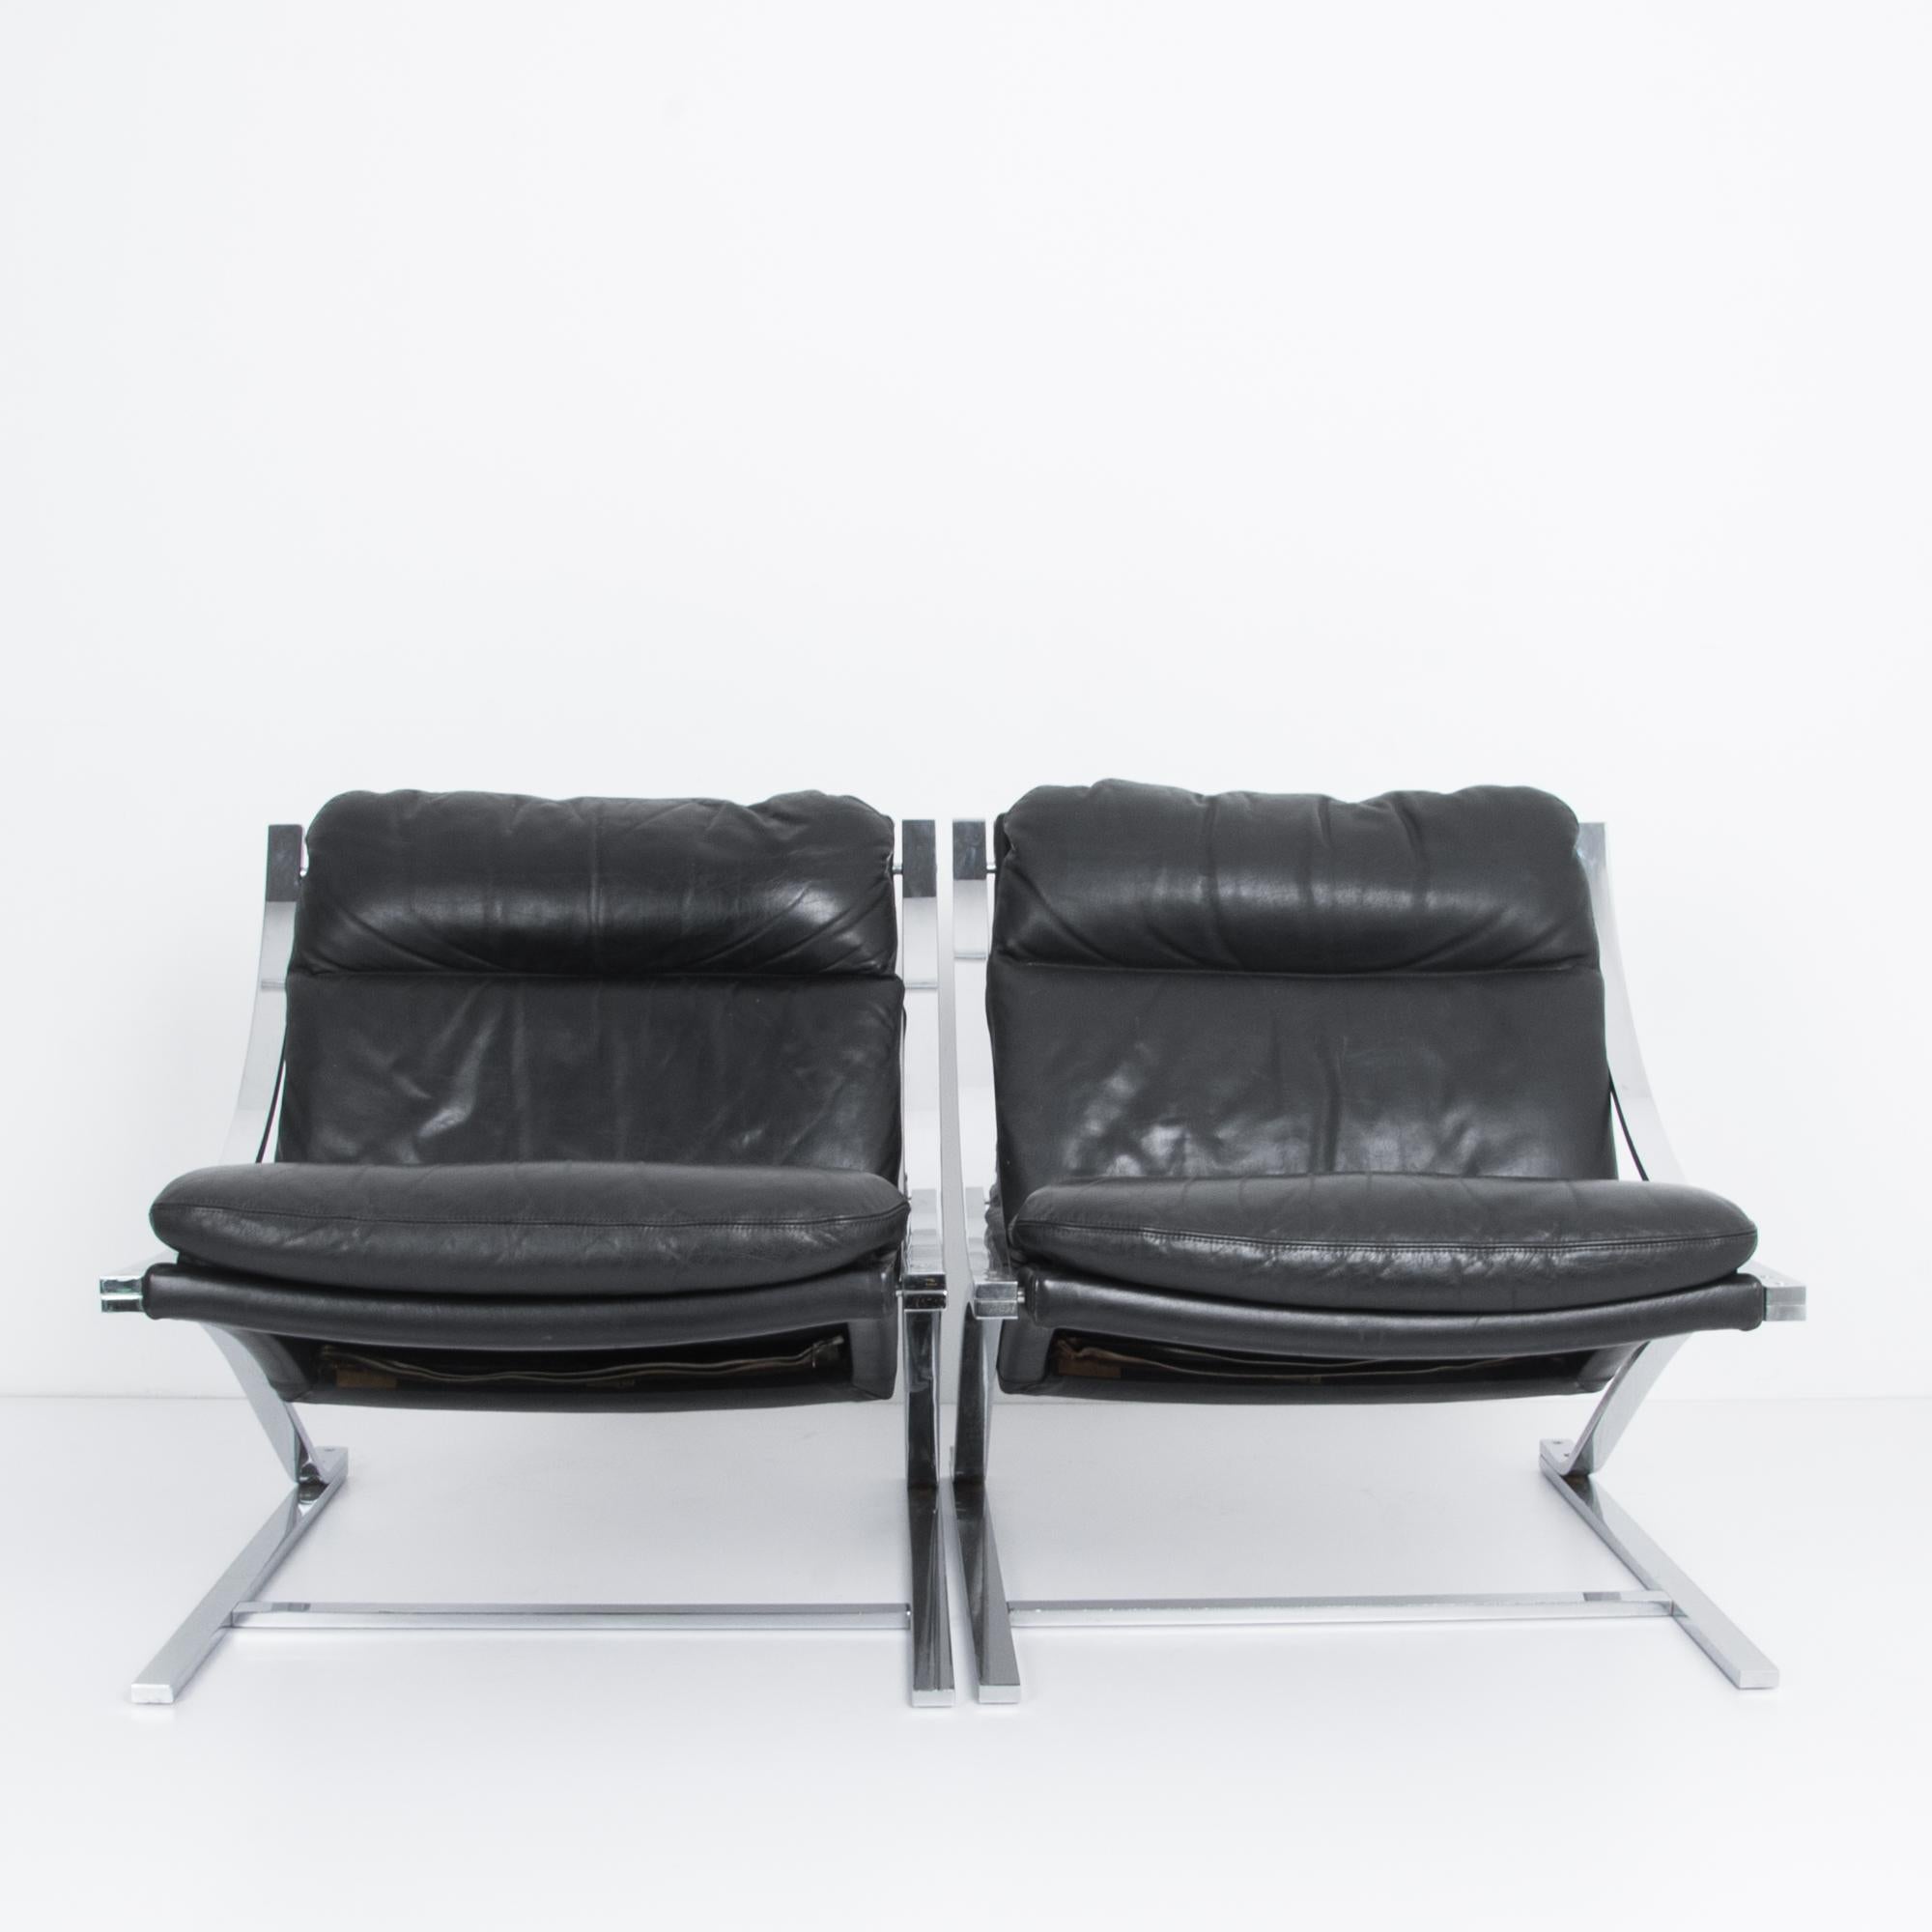 A classic design by Paul Tuttle, the “Zeta” chairs are framed by a distinctive chrome armature; a cantilevered letter Z. The alphabetical motif became a benchmark in the pantheon of midcentury furniture. Here in iconic black leather manufactured to